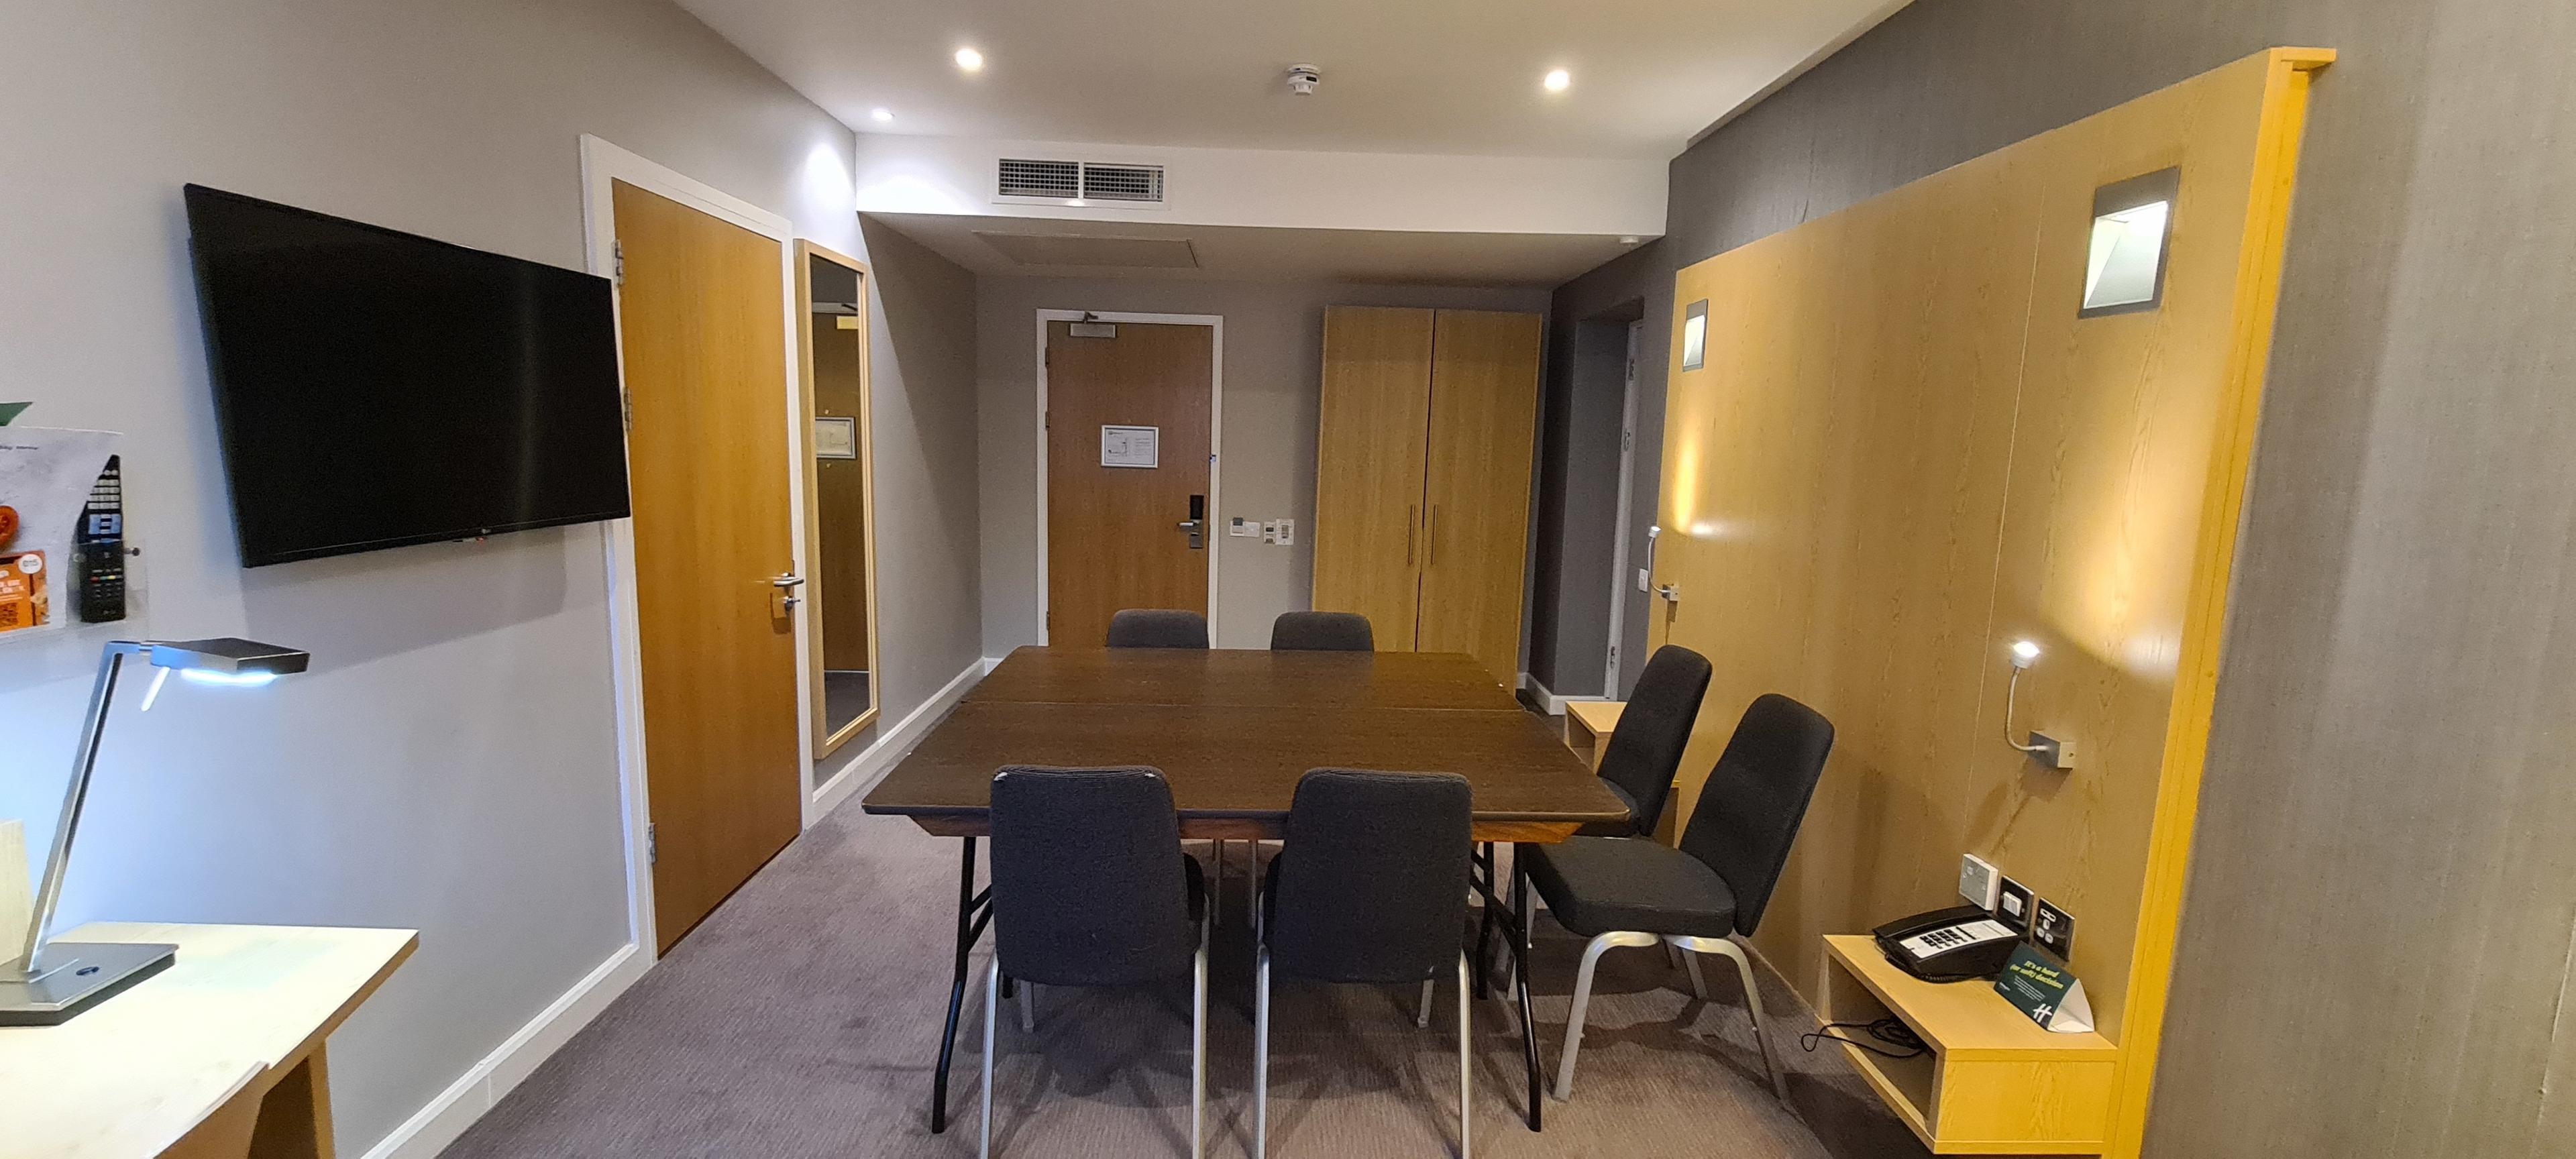 Syndicate Meeting Room, Holiday Inn London Luton Airport photo #1